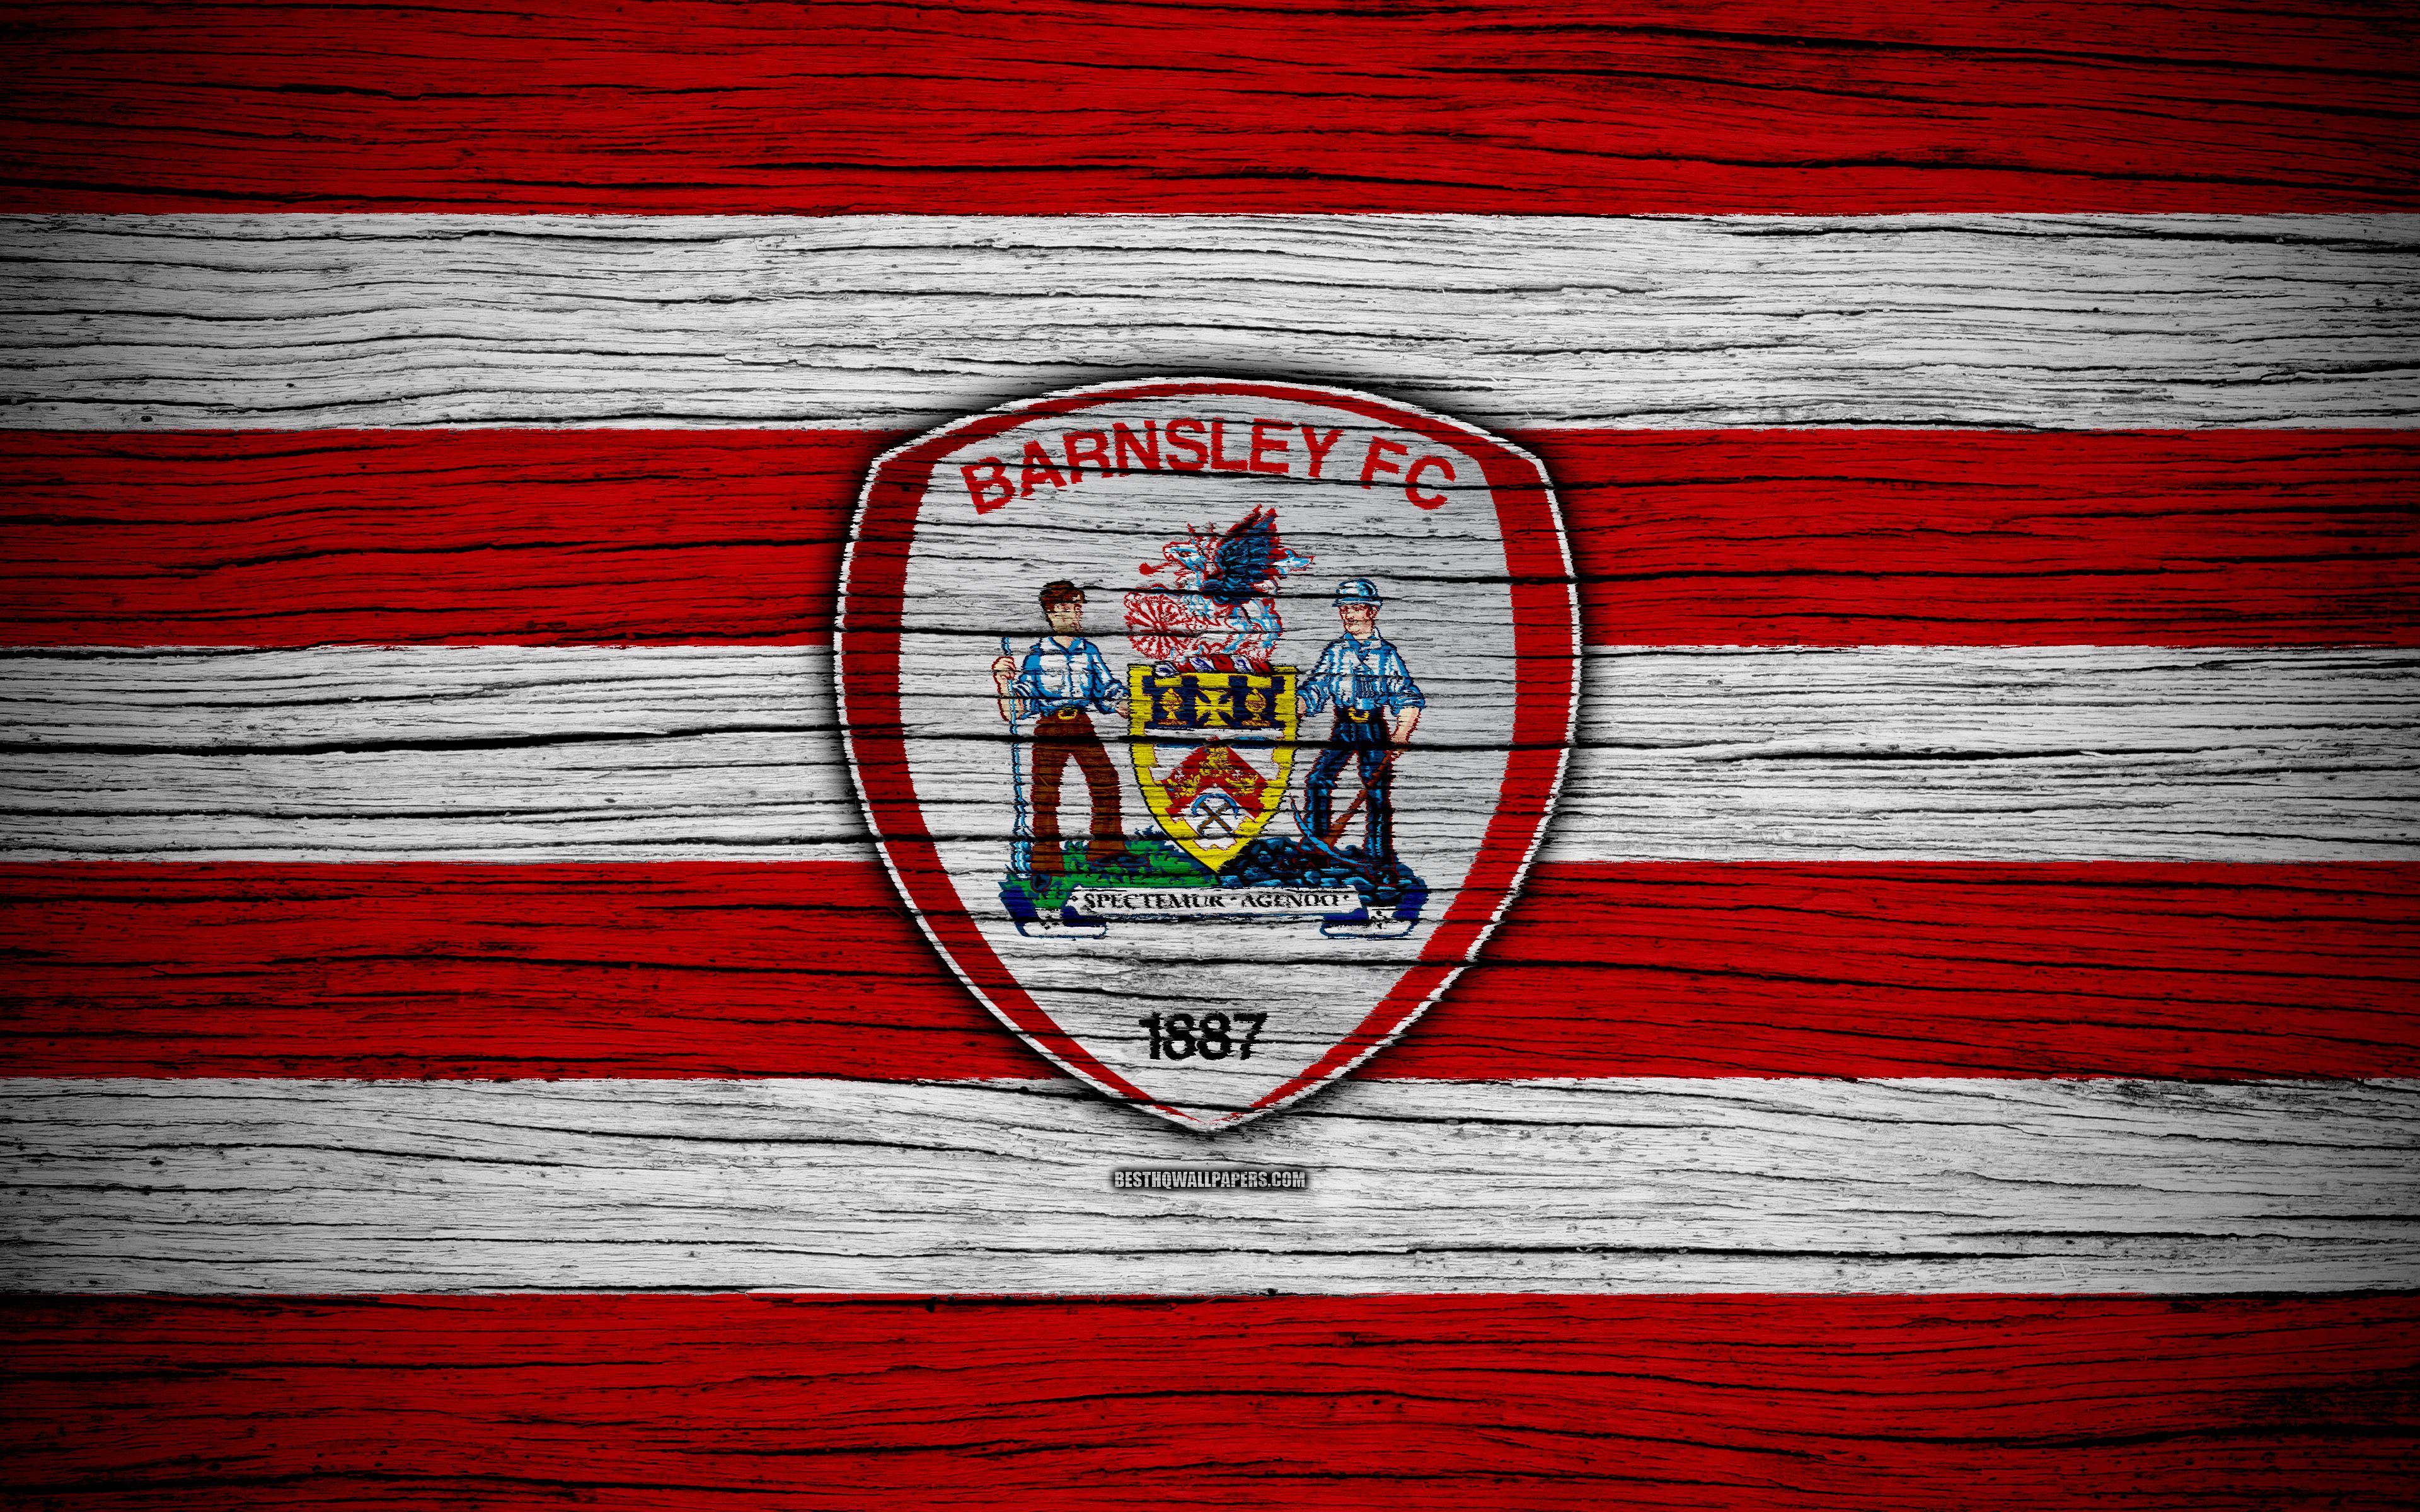 Download wallpaper Barnsley FC, 4k, EFL Championship, soccer, football club, England, Barnsley, logo, wooden texture, FC Barnsley for desktop with resolution 3840x2400. High Quality HD picture wallpaper